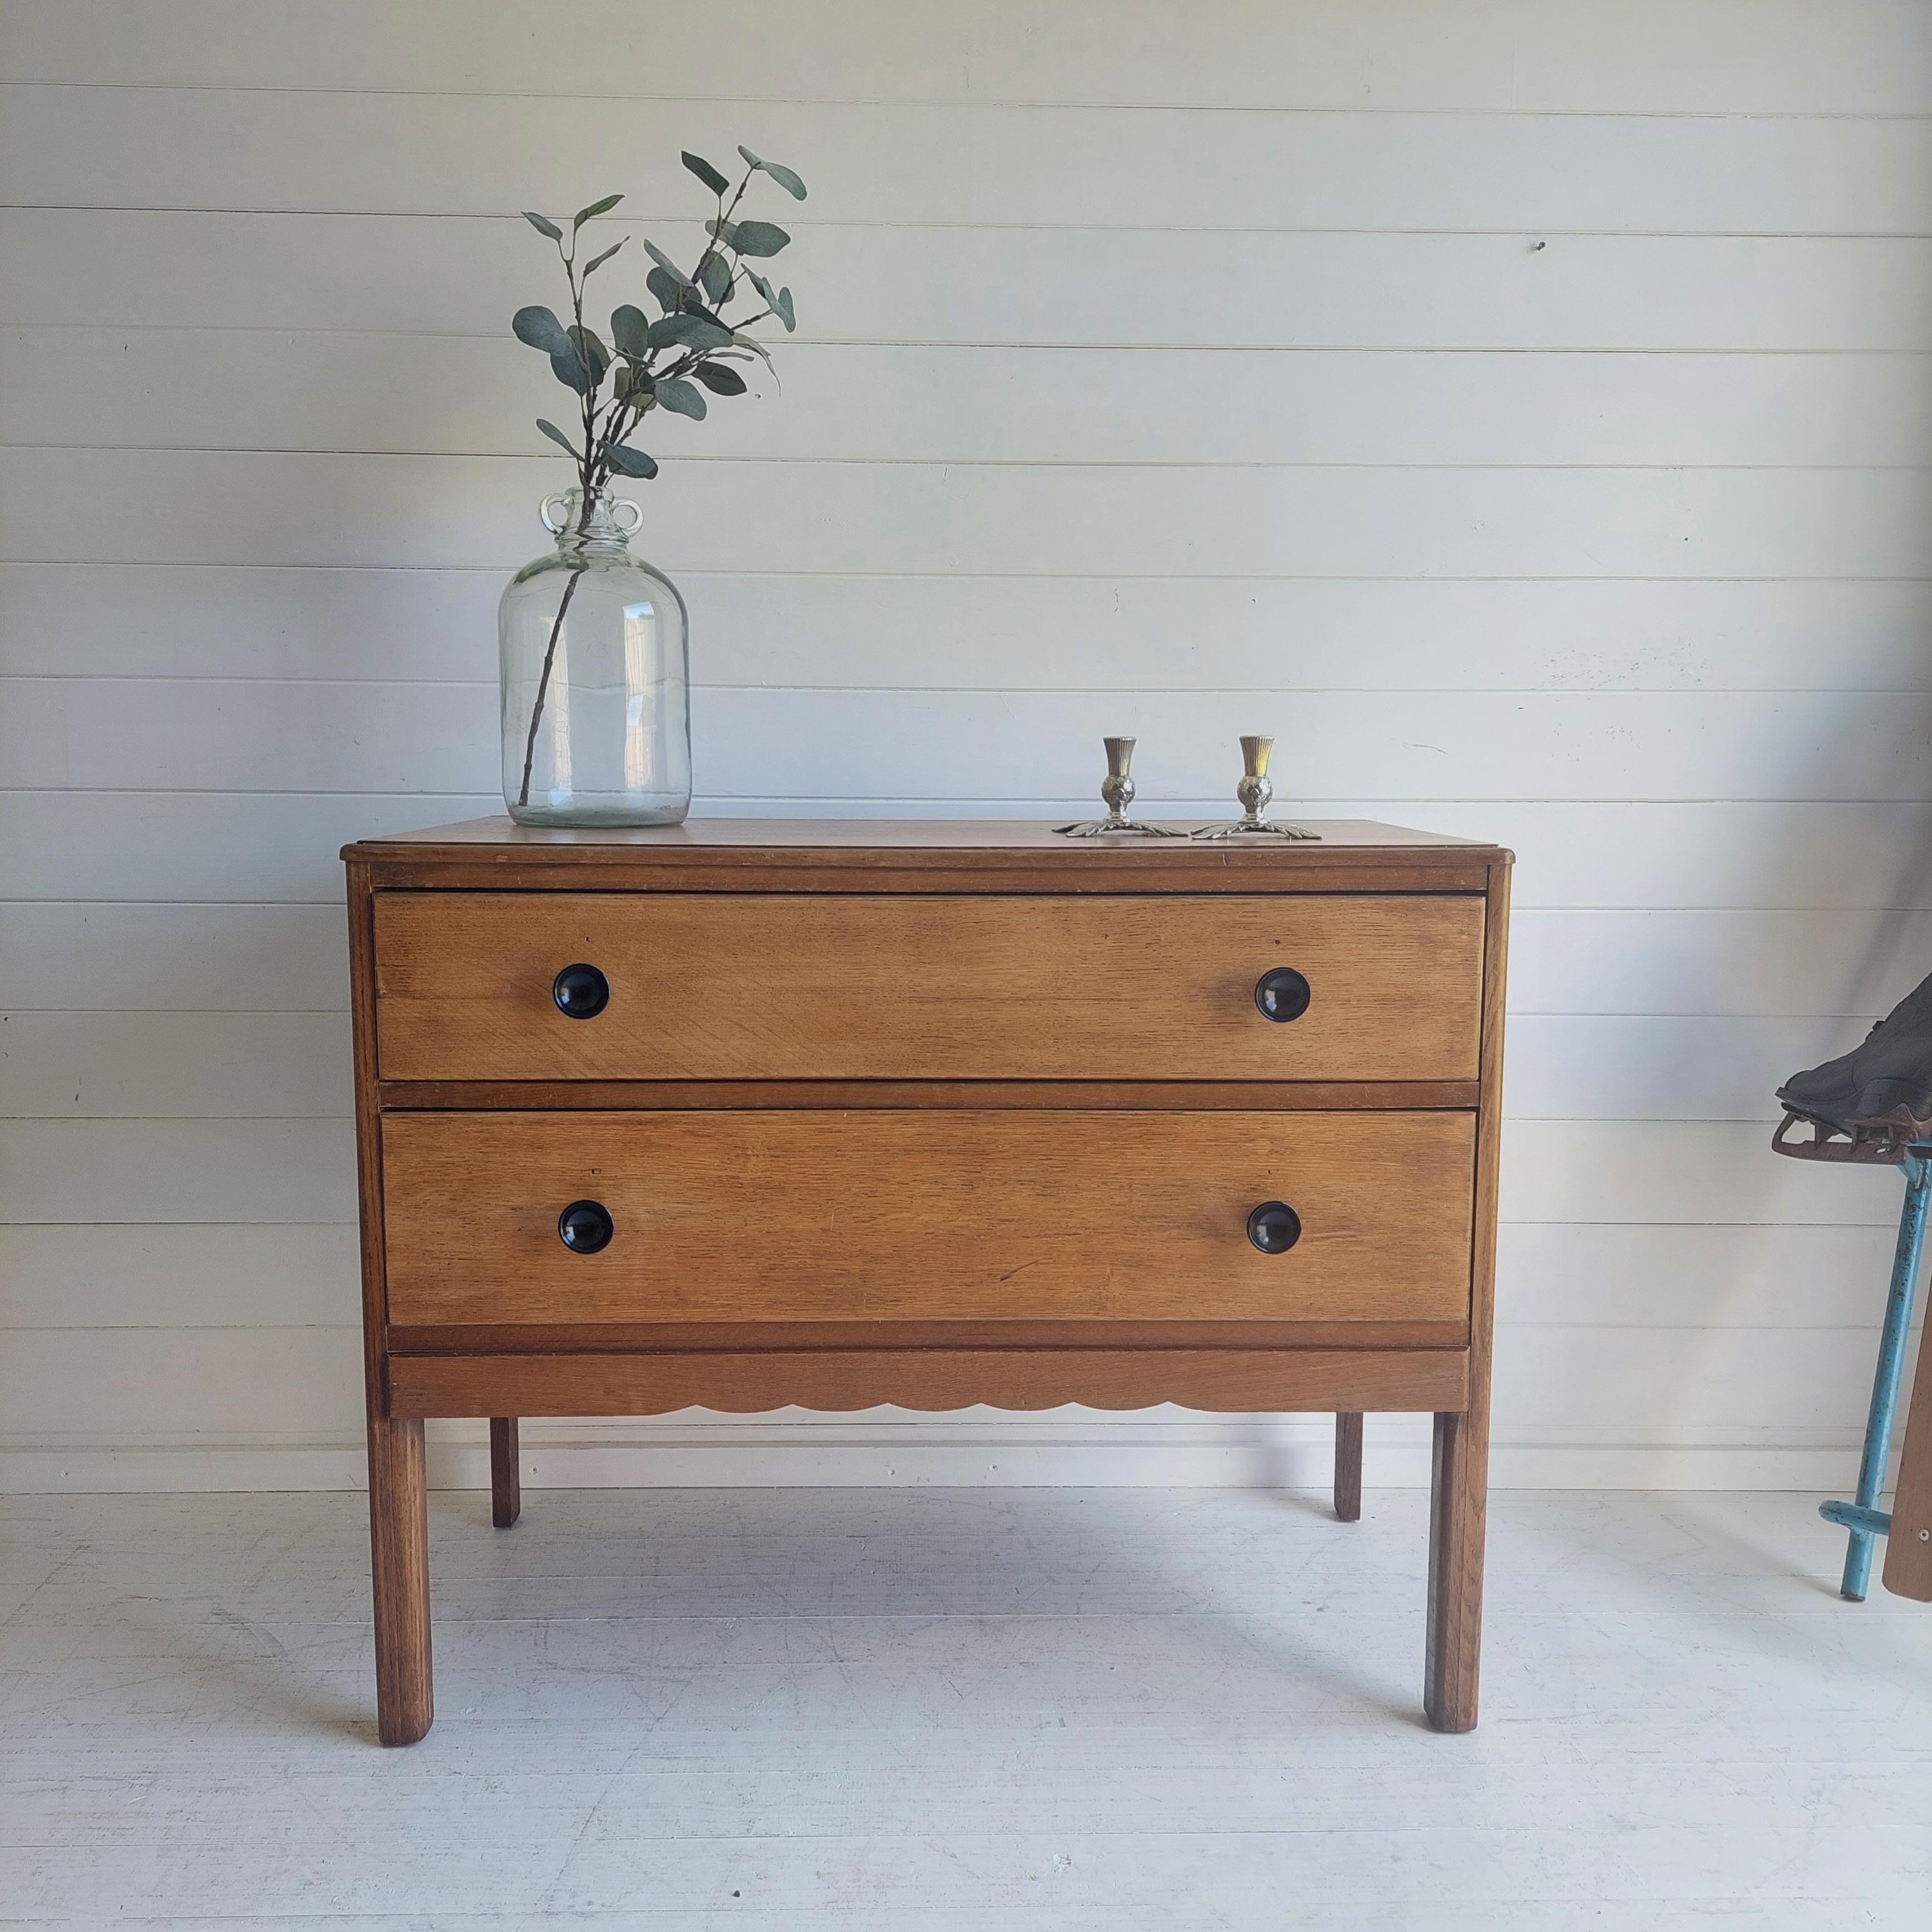 Charming Rustic Country Farmhouse Style Vintage Oak Chest of Drawers
Beautiful chest of drawers 